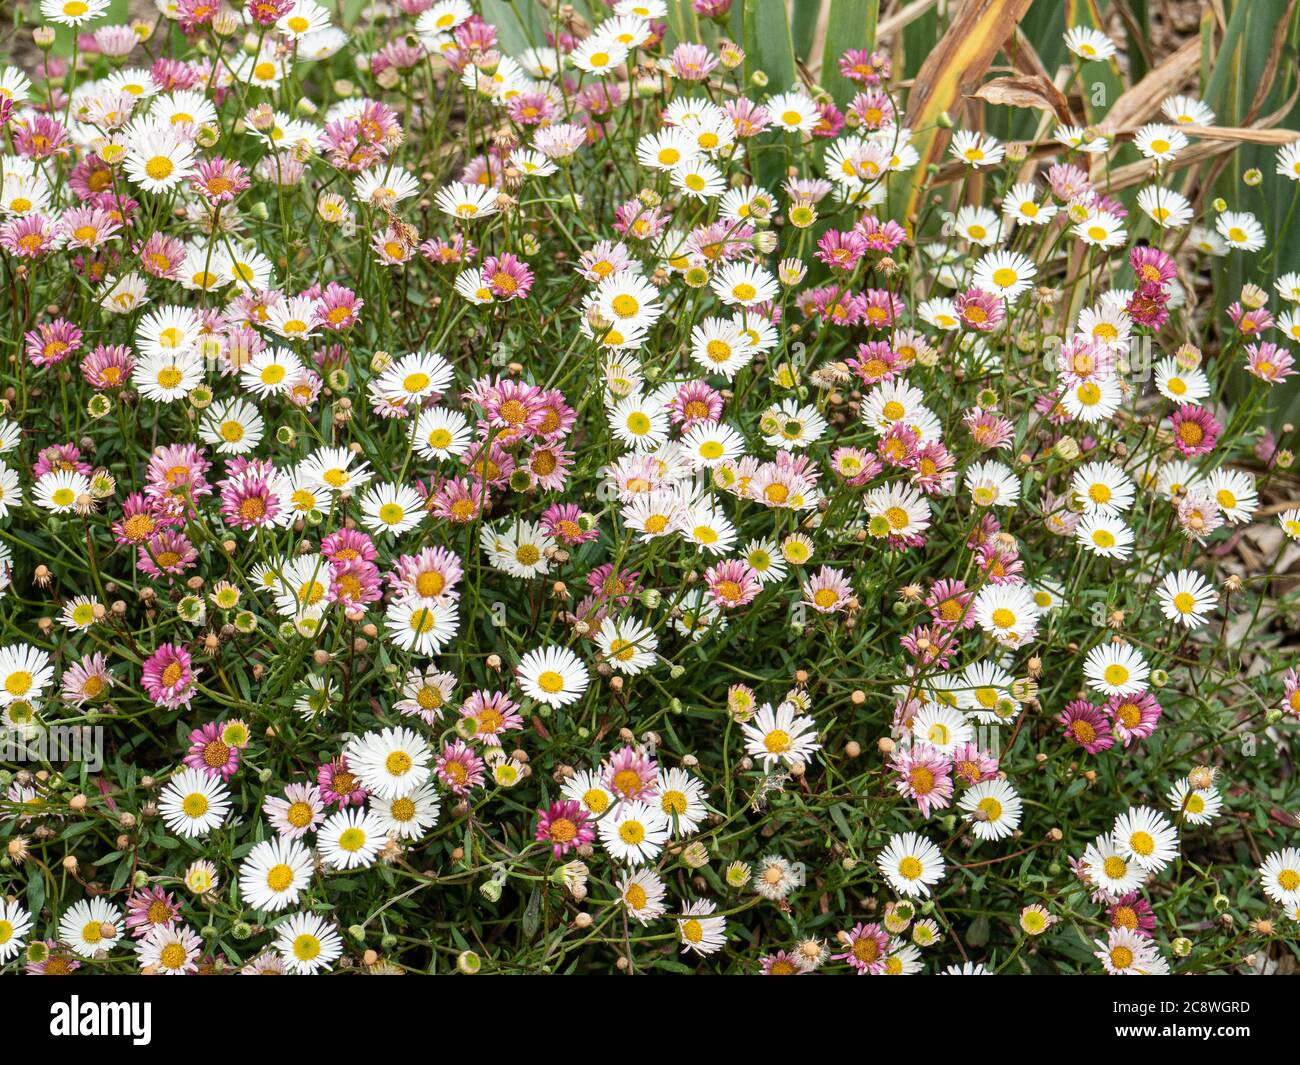 A clump of Erigeron karvinskianus in flower showing a mix of the white flowers changing to pink as they age Stock Photo